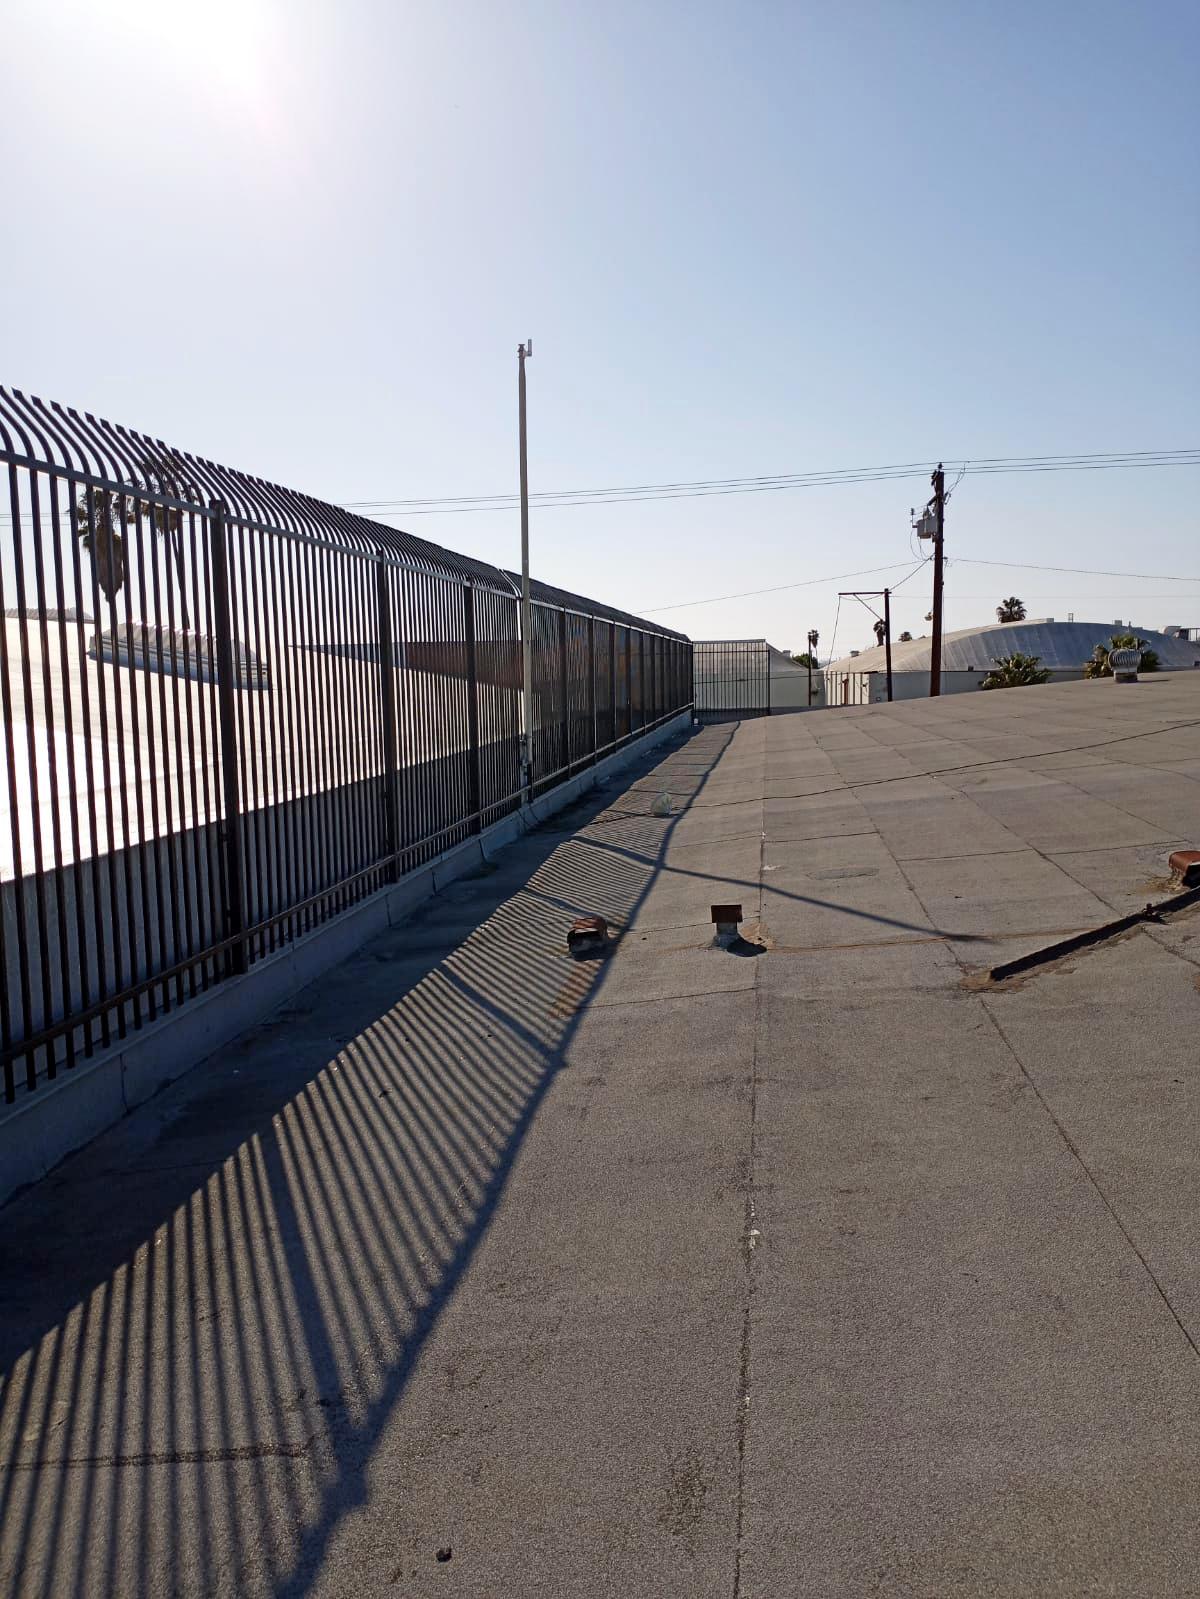 Commericial Fence and CCTV Systems Installation in Kearny Mesa